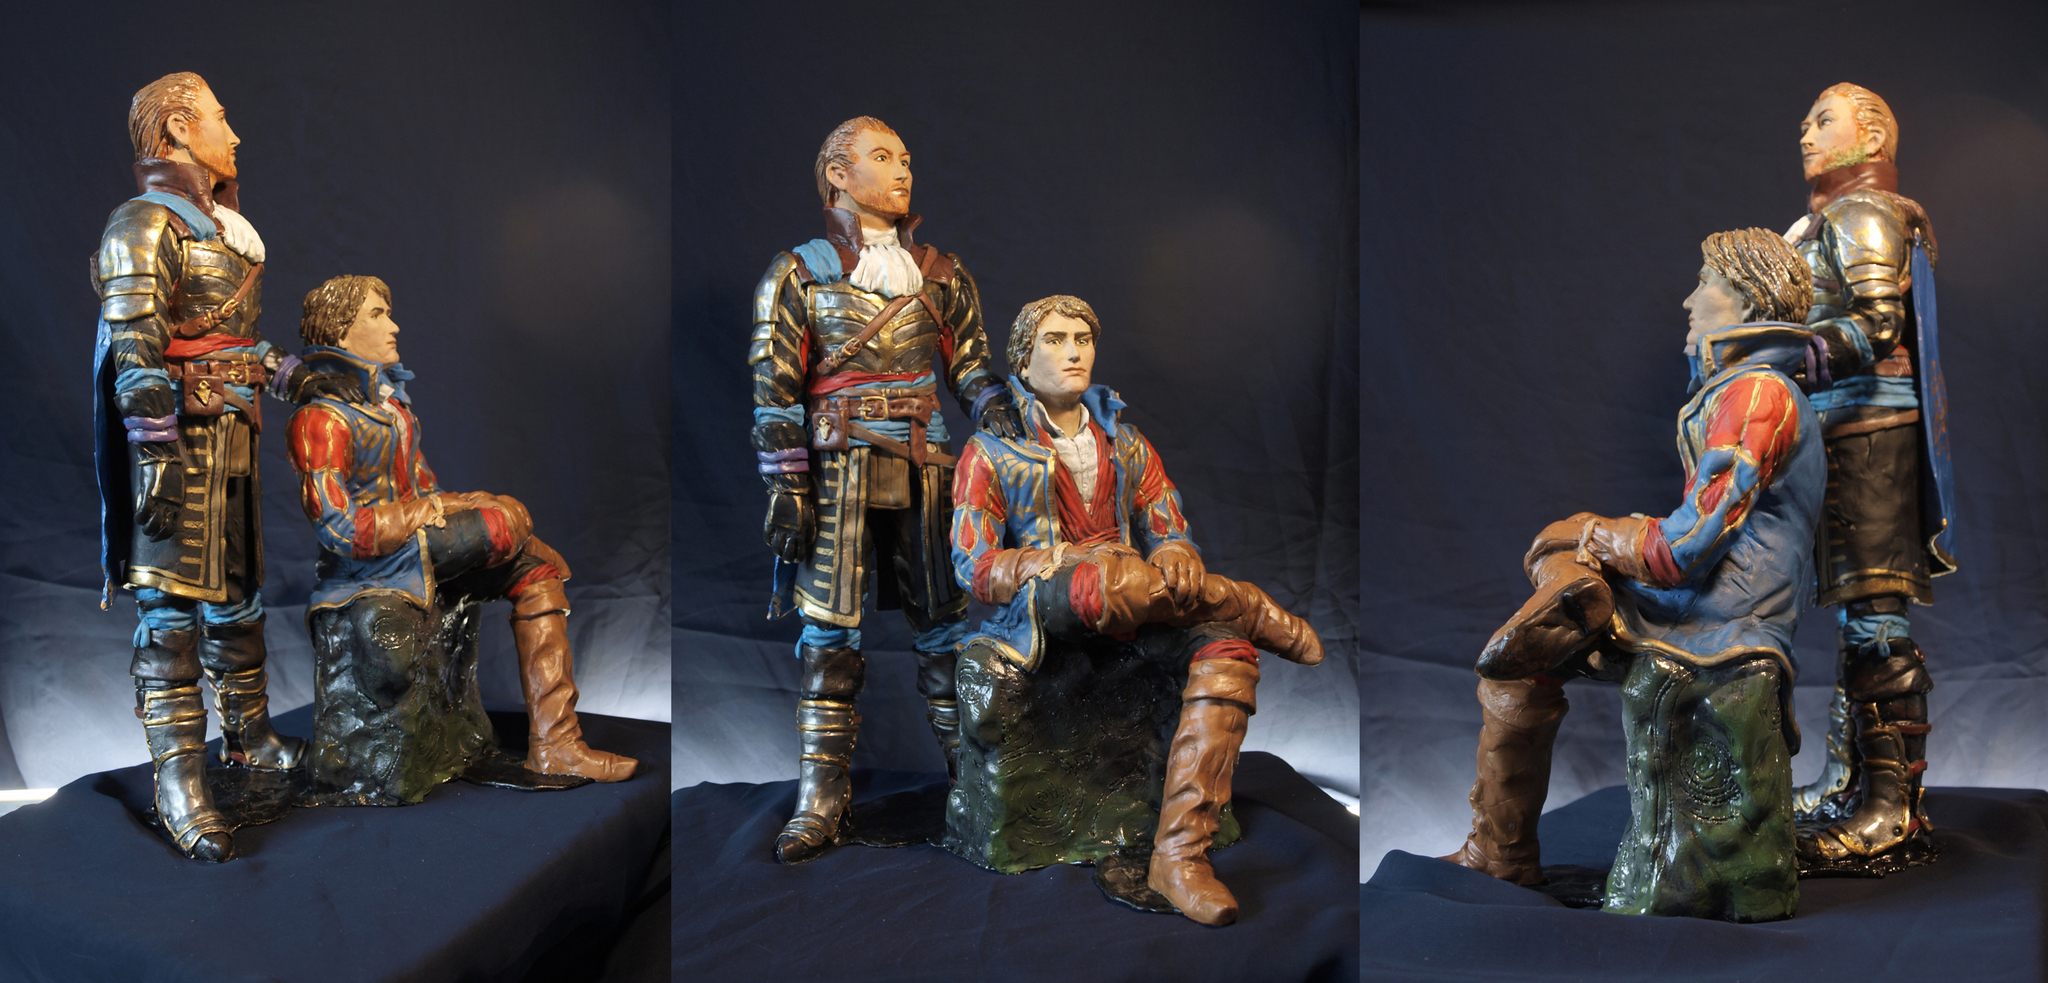 Figures based on the game Greedfall. De Sarde and Constantin De Orsay - My, Kai Yara, Needlework without process, Sculpture, Figurines, Greedfall, Video, Youtube, Longpost